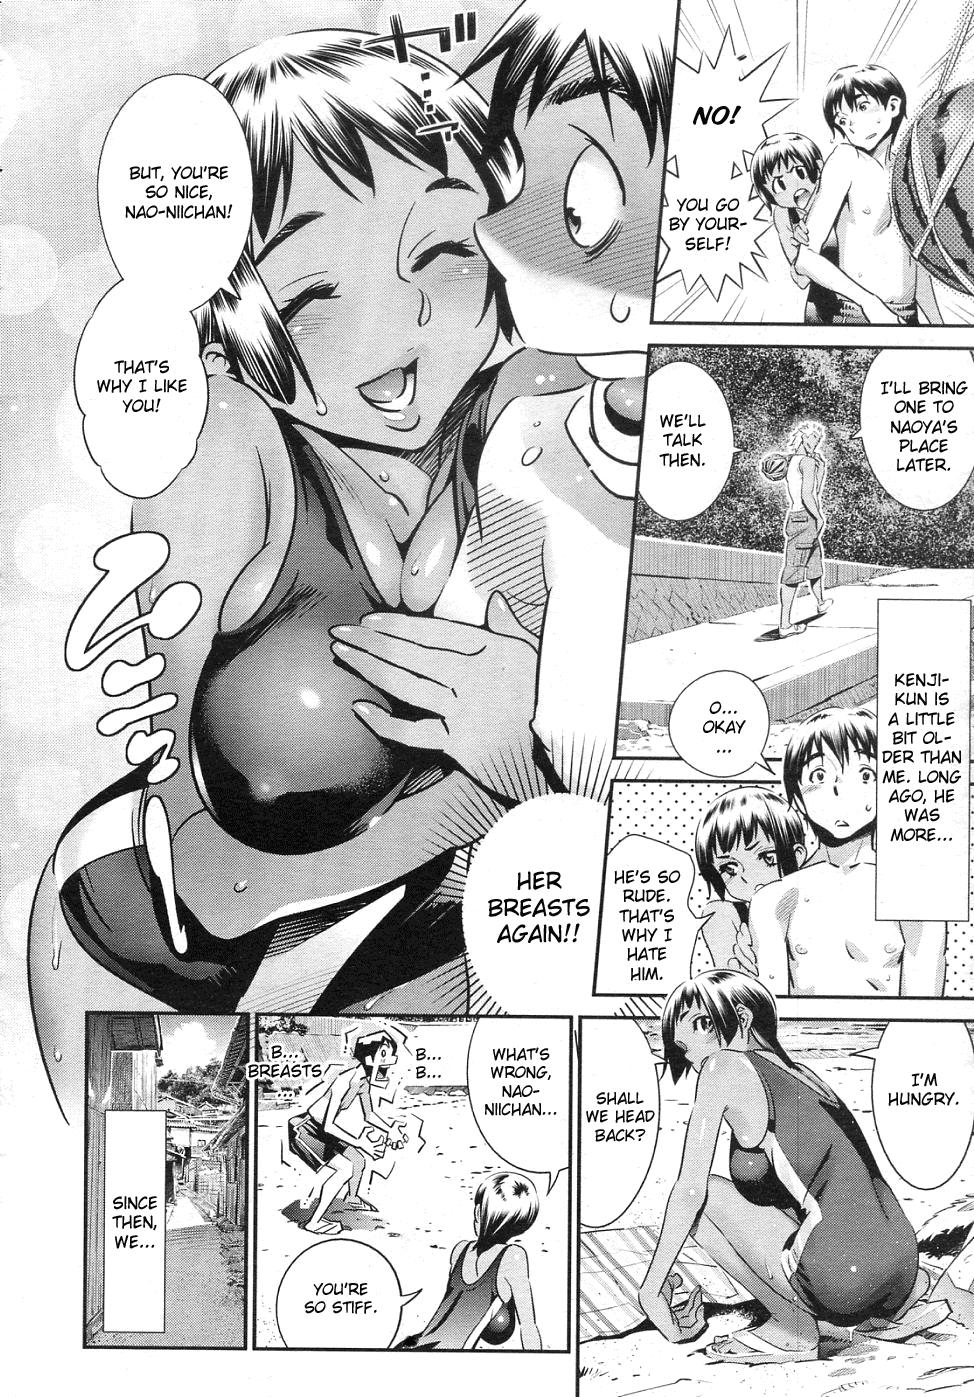 Lingerie Ano Natsu, Omoide no Umi - One Summer Dream Pounded - Page 8